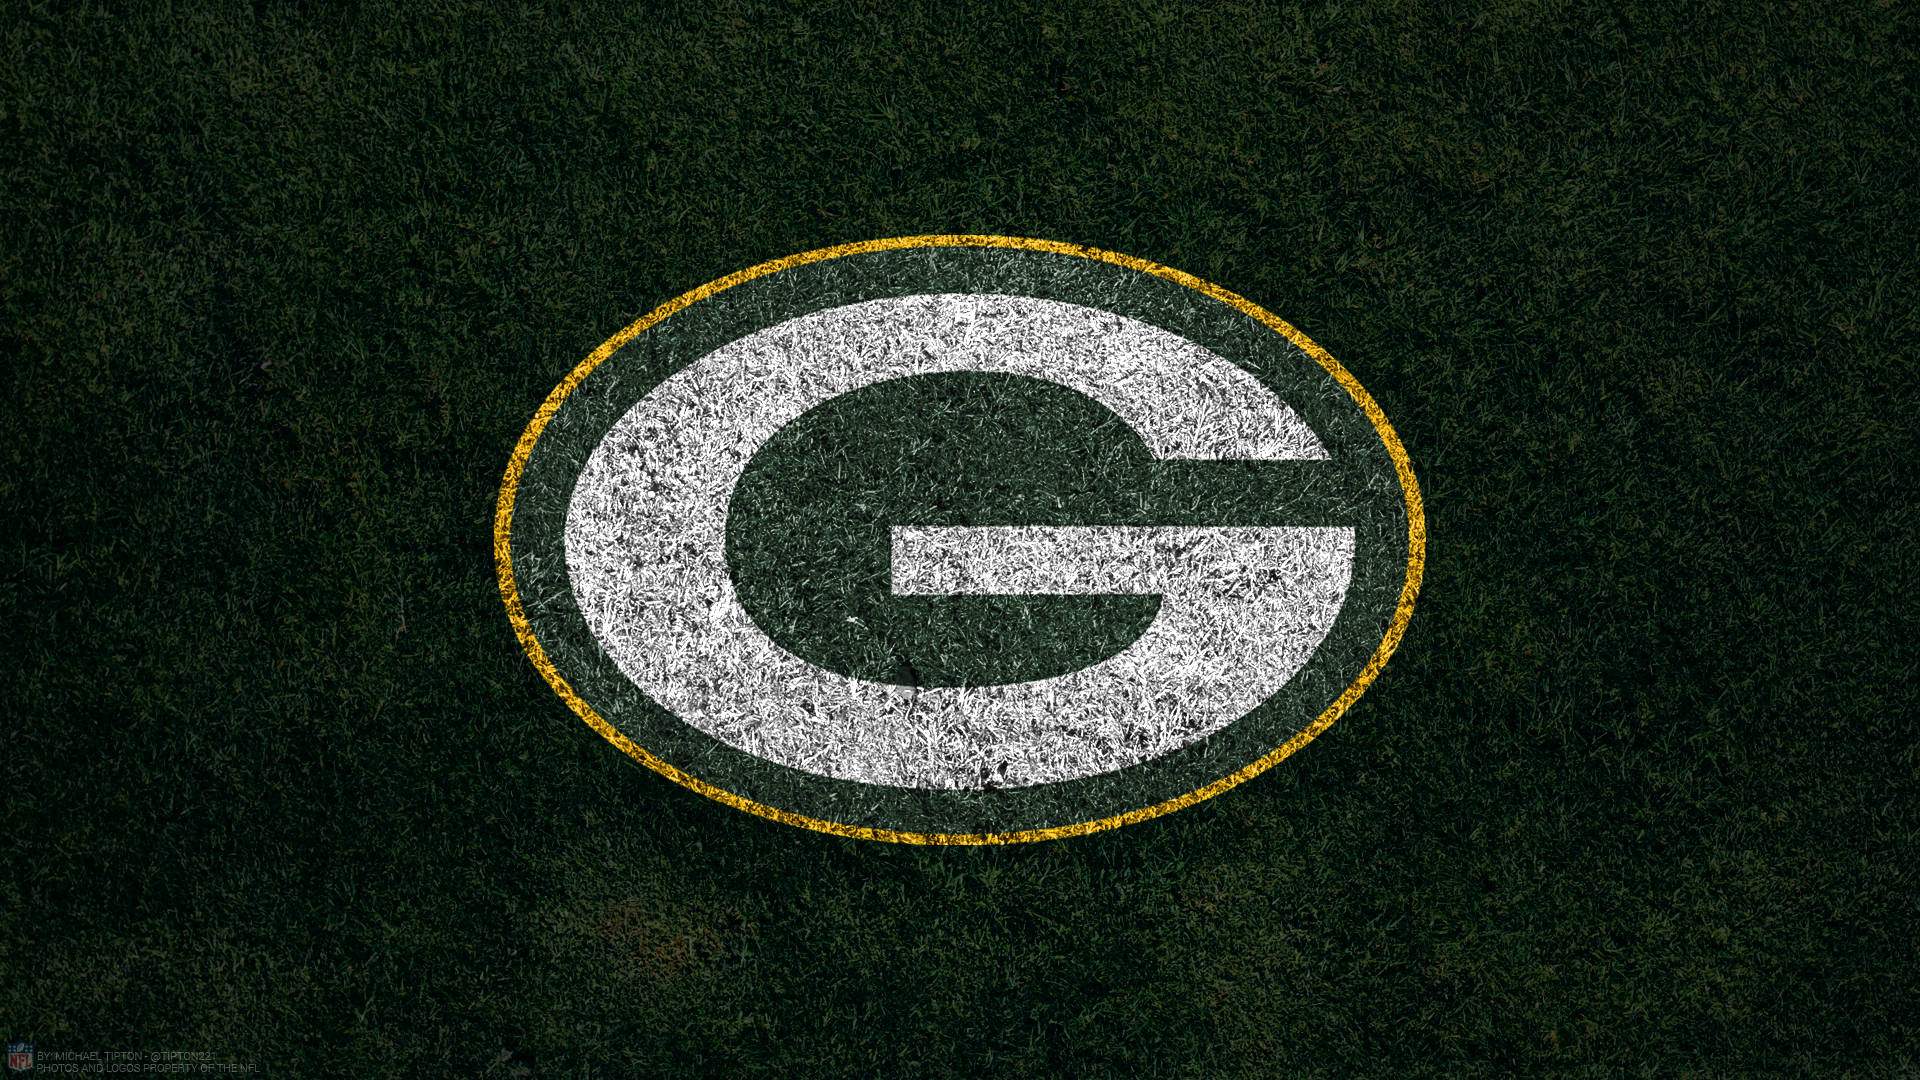 Green Bay Packers Wallpaper Pc iPhone Android